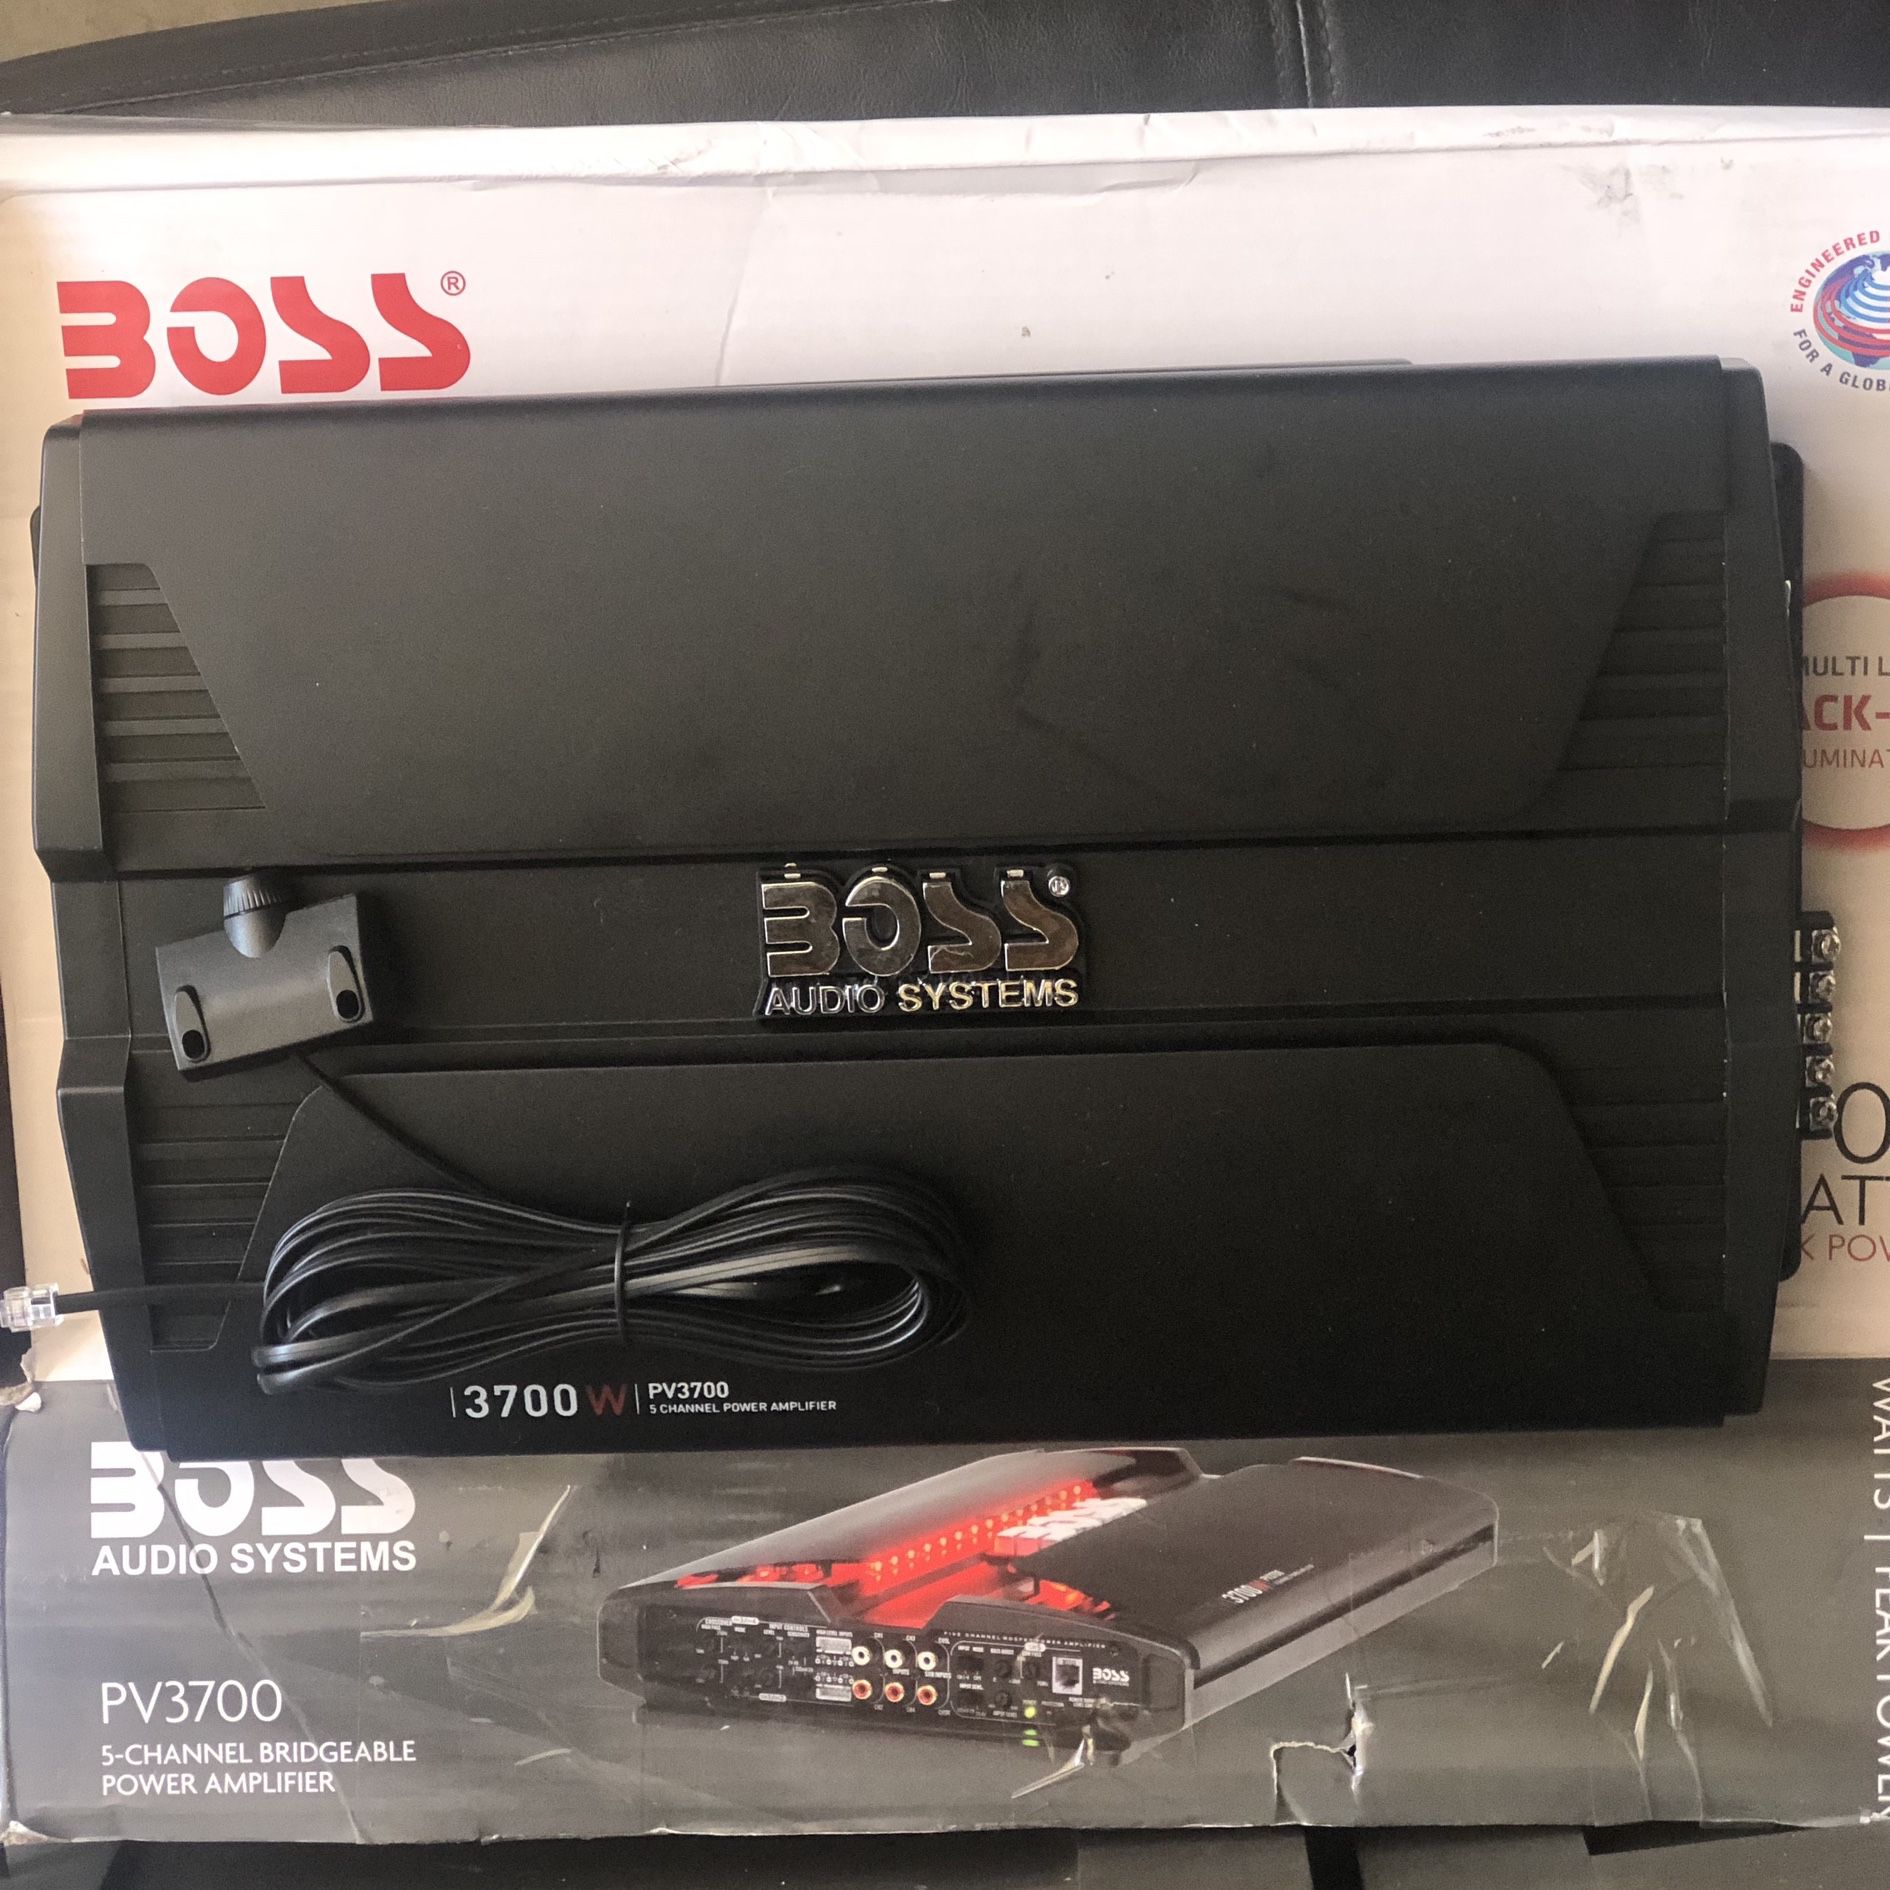 BOSS Audio Systems PV3700 Amplifier for Sale in CA - OfferUp